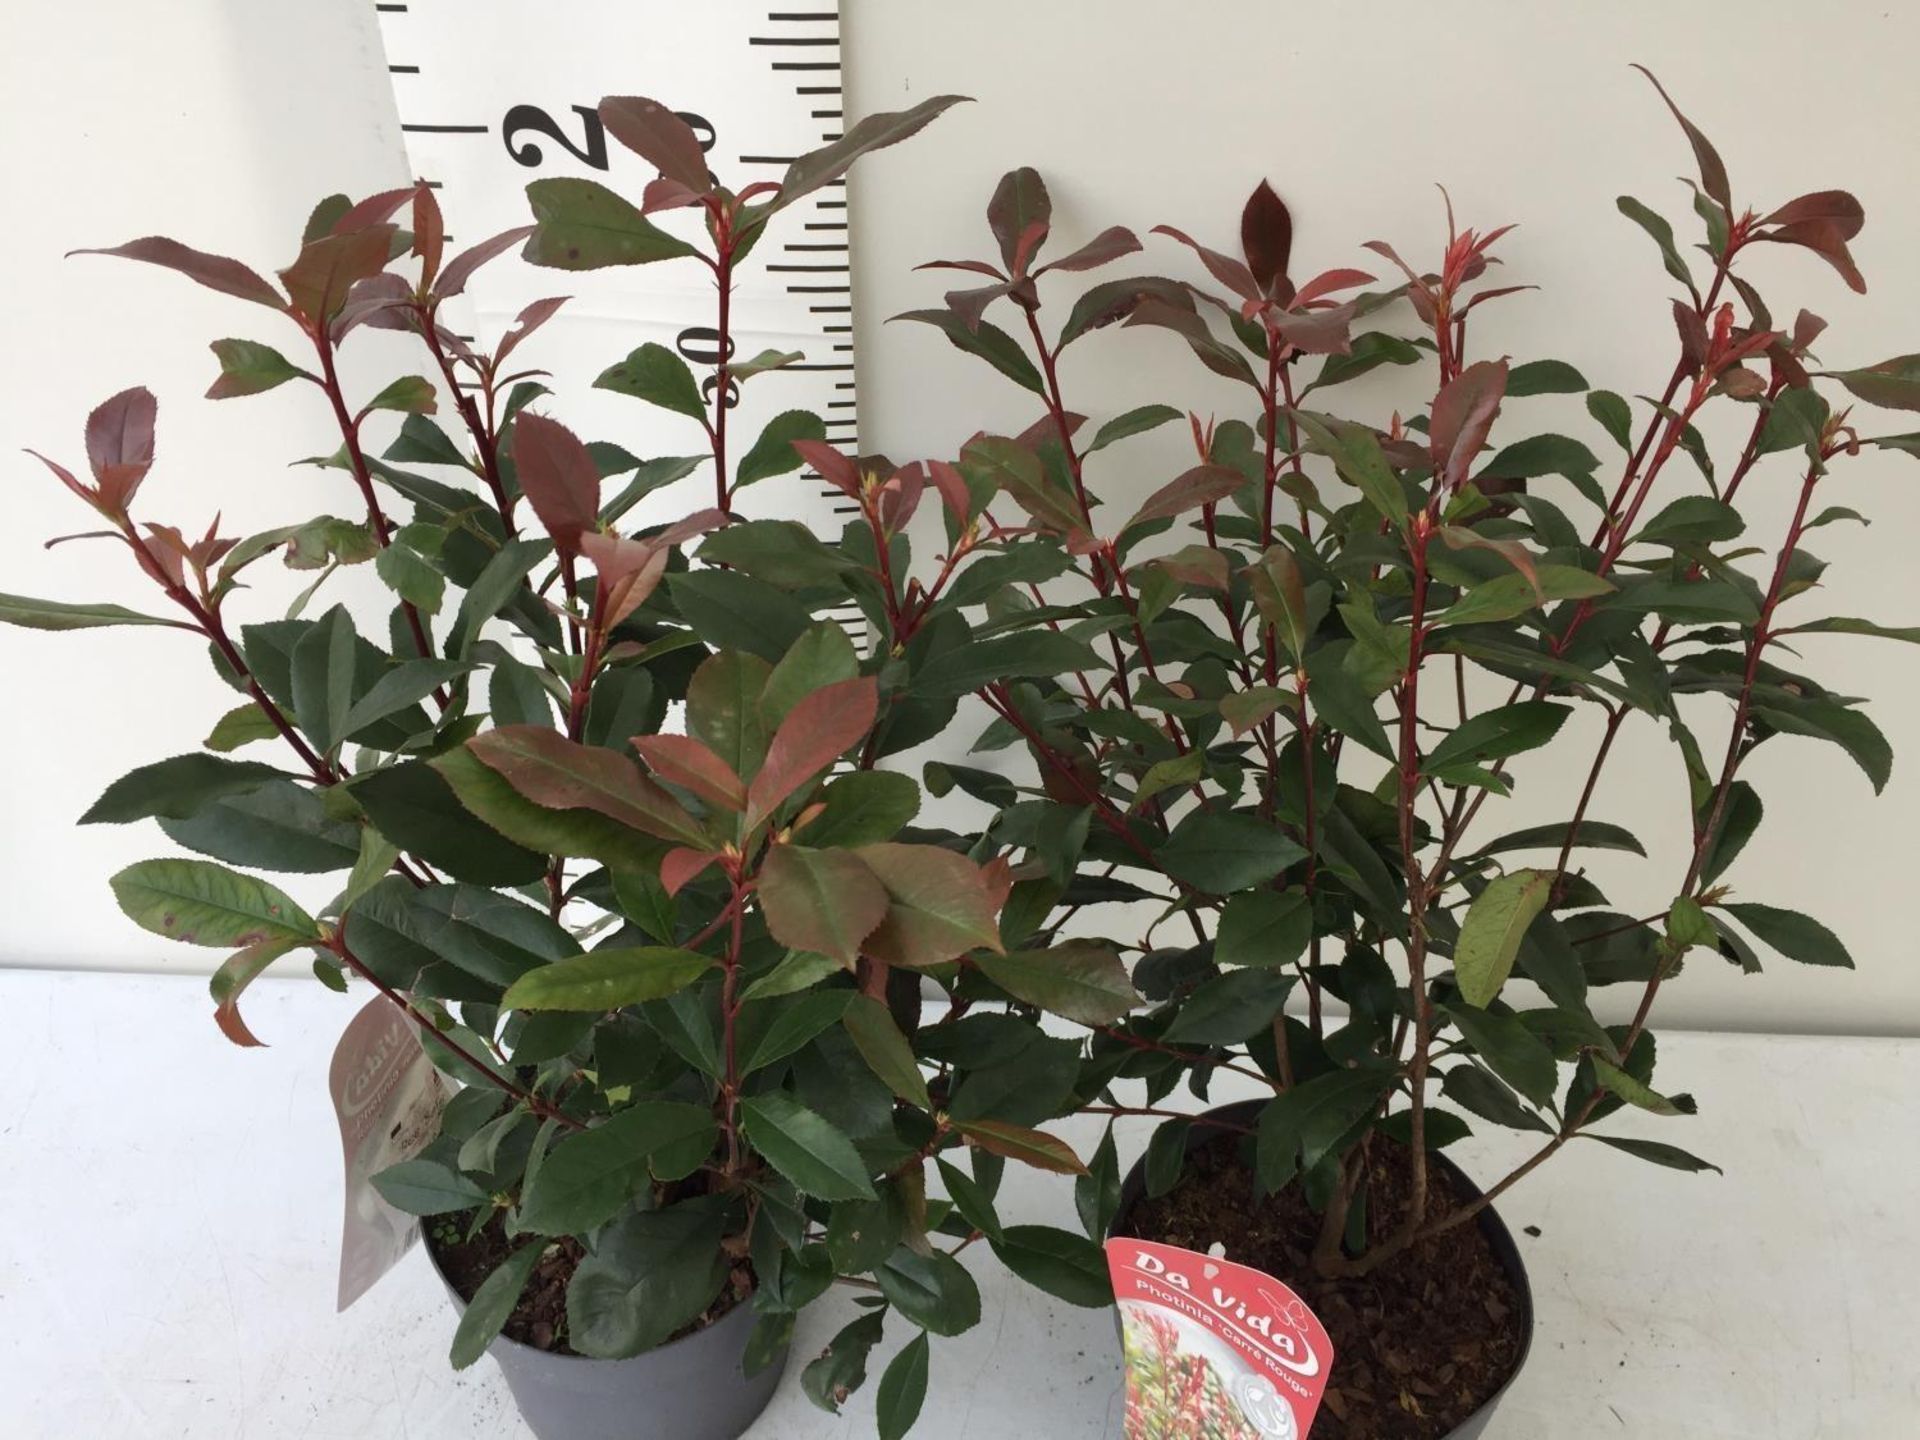 TWO PHOTINIA FRASERI 'CARRE ROUGE' PLANTS IN 3 LTR POTS APPROX 60CM IN HEIGHT PLUS VAT TO BE SOLD - Image 3 of 8